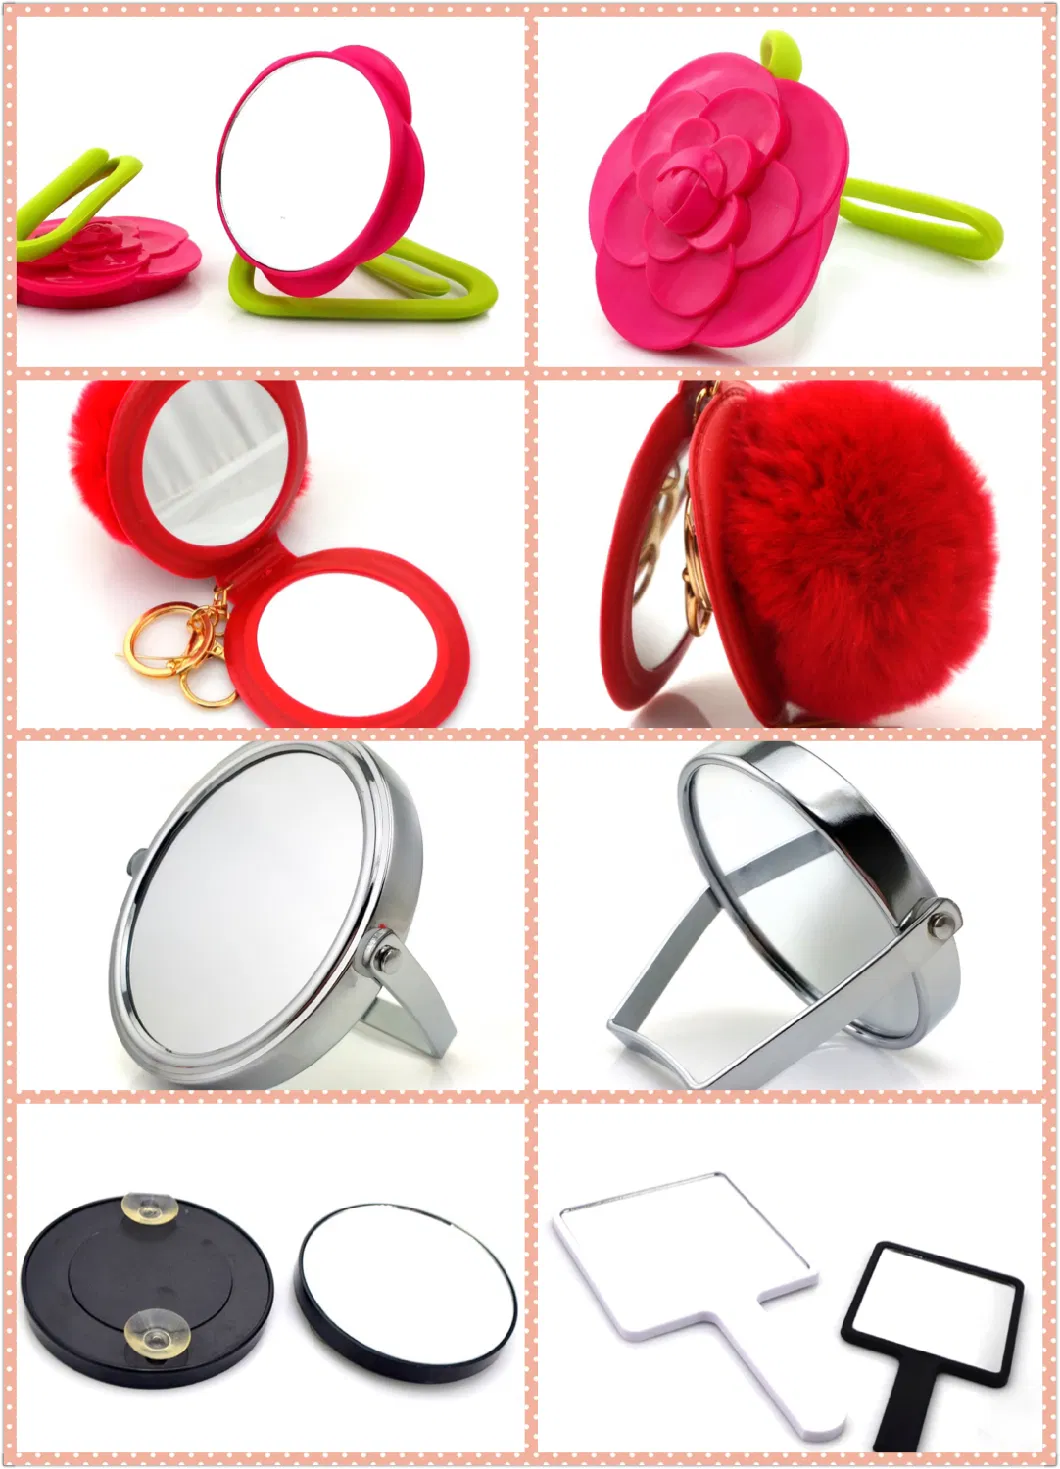 Professional Square Shape Plastic Hand Held Makeup Mirror for Cosmetic